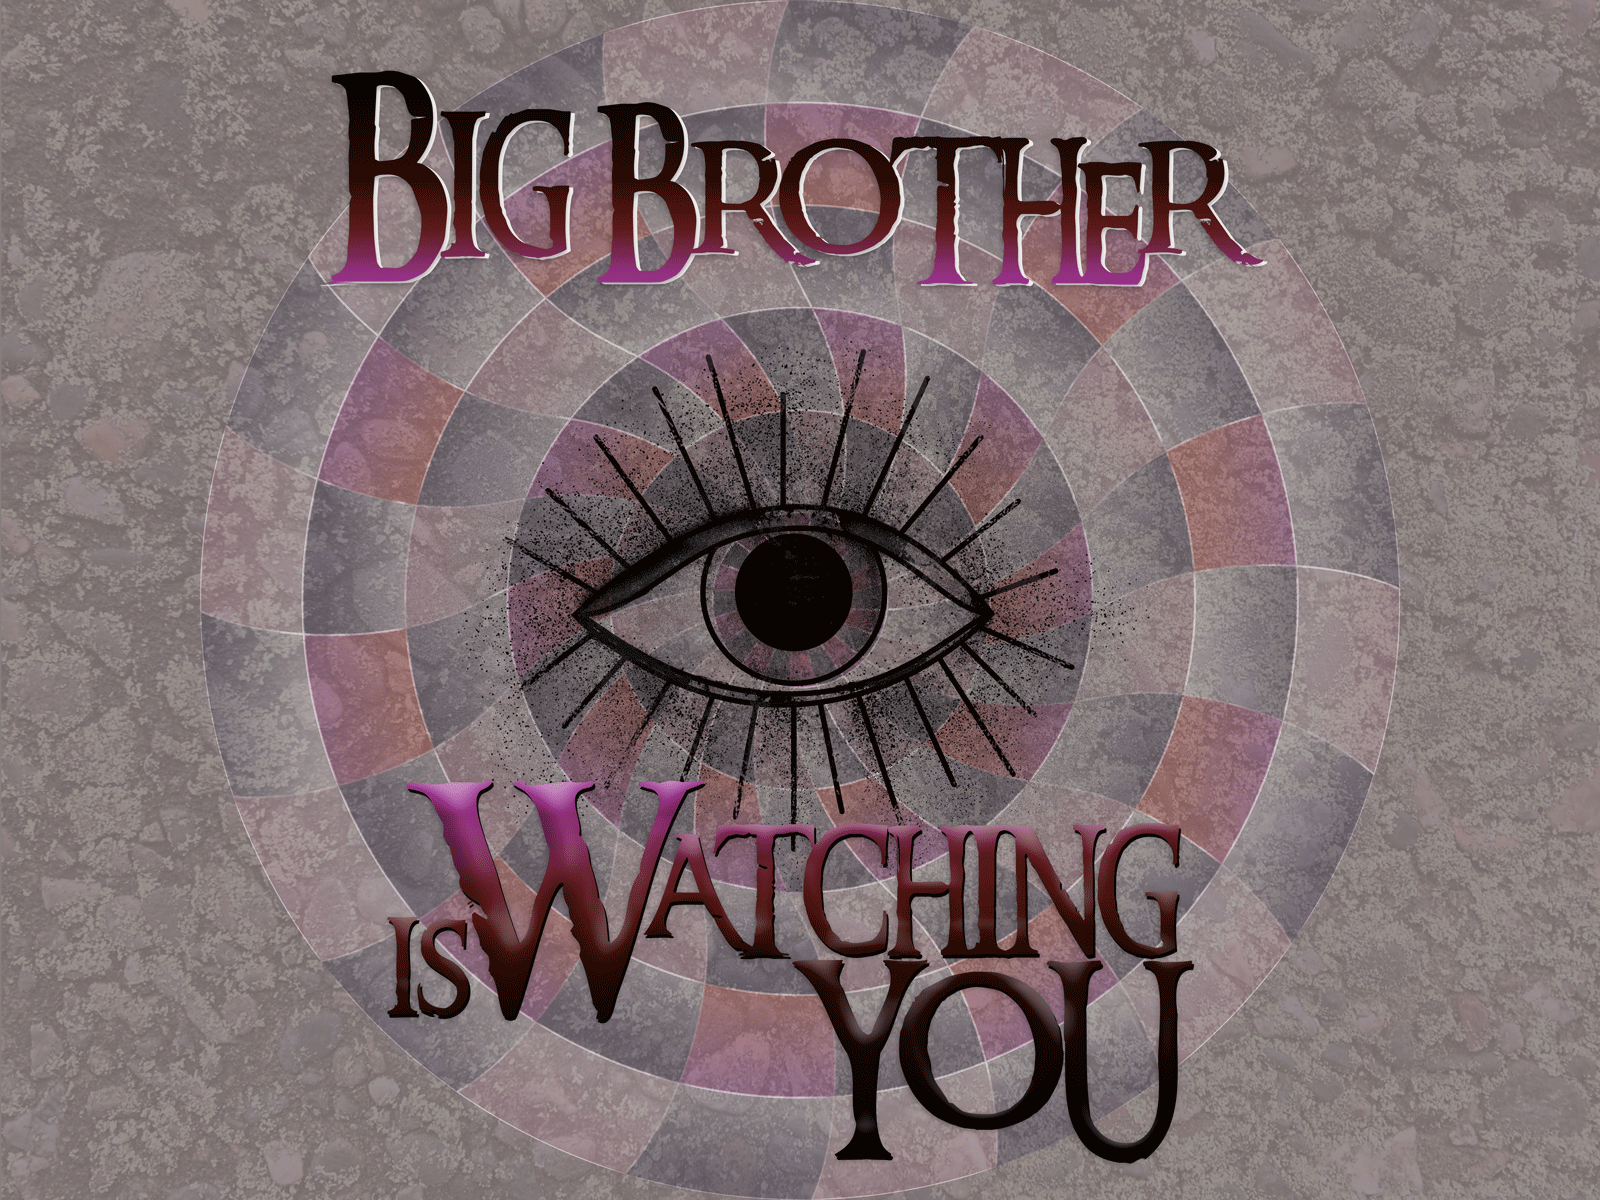 Big brother is watching you design illustration photoshop poster